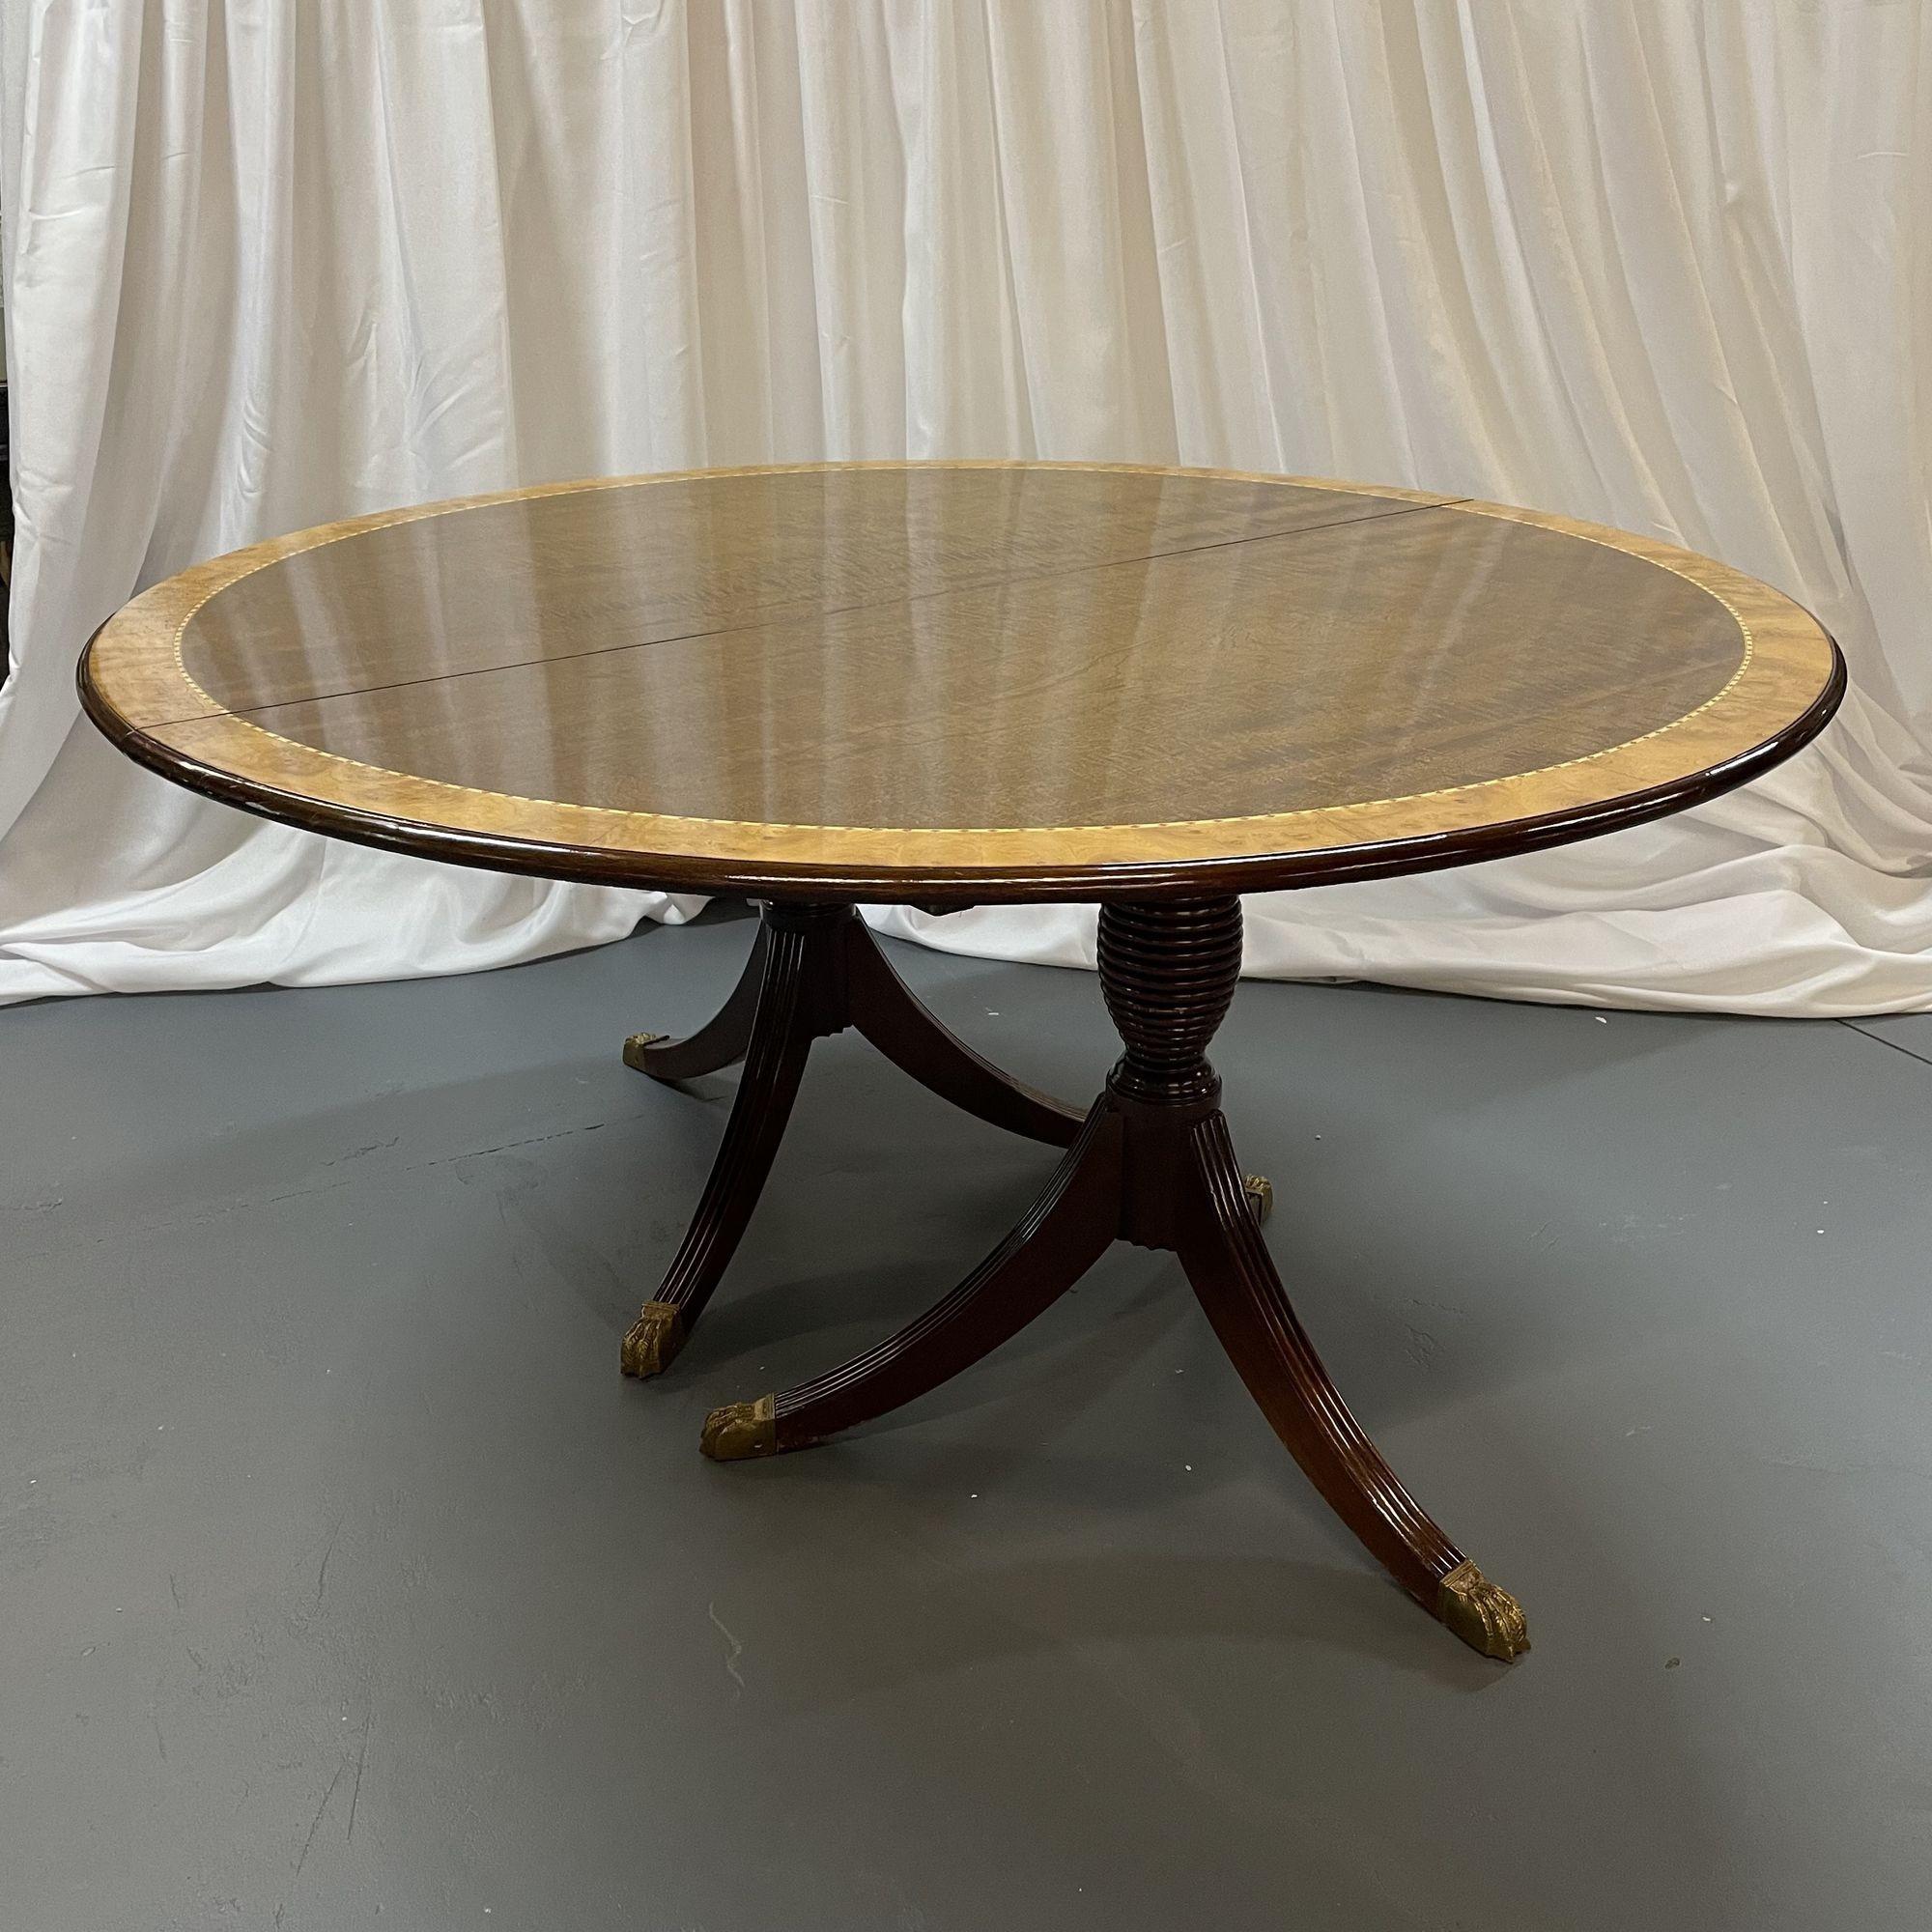 A Sixty Inch Round Regency Style Dining Table with Two 24 inch Leaves. Part of our extensive collection of over forty dining tables and chair sets.

The double tripod base having bronze claw feet supporting a flame mahogany satin wood banded and